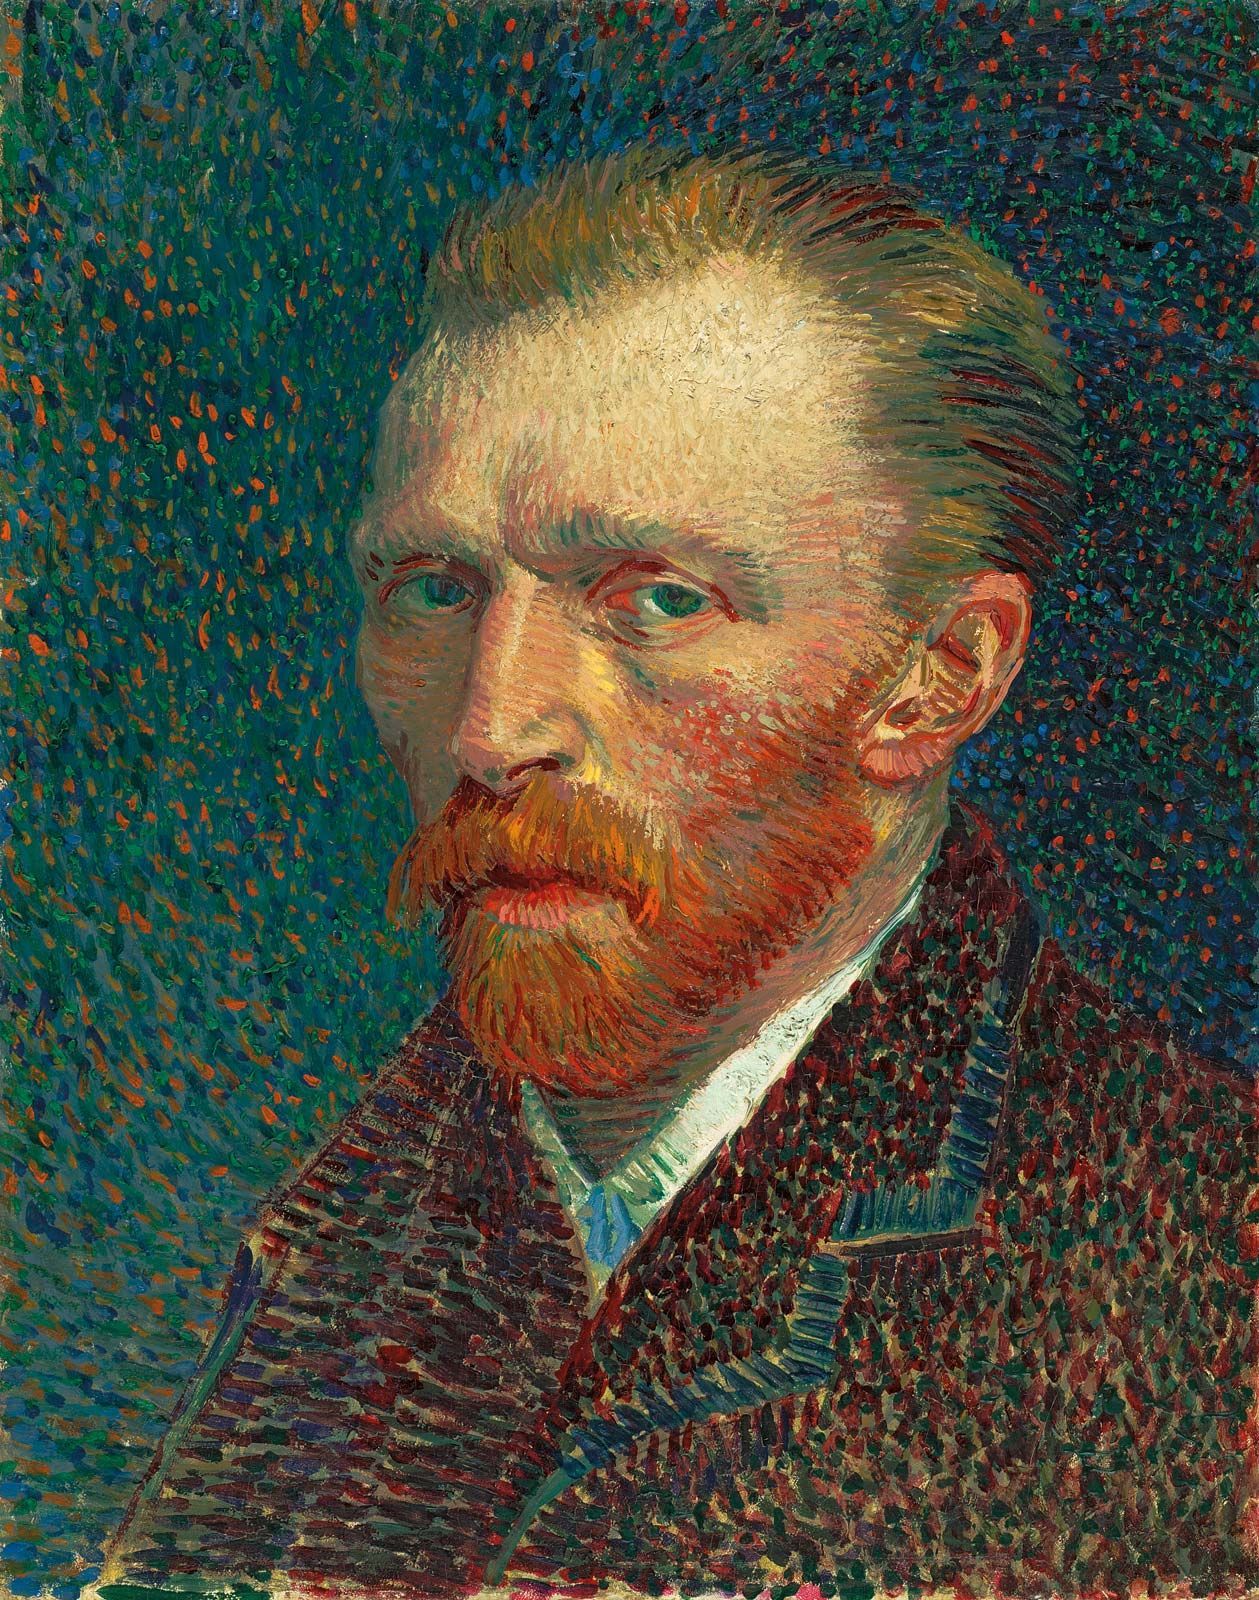 Van Gogh was found alive in his home